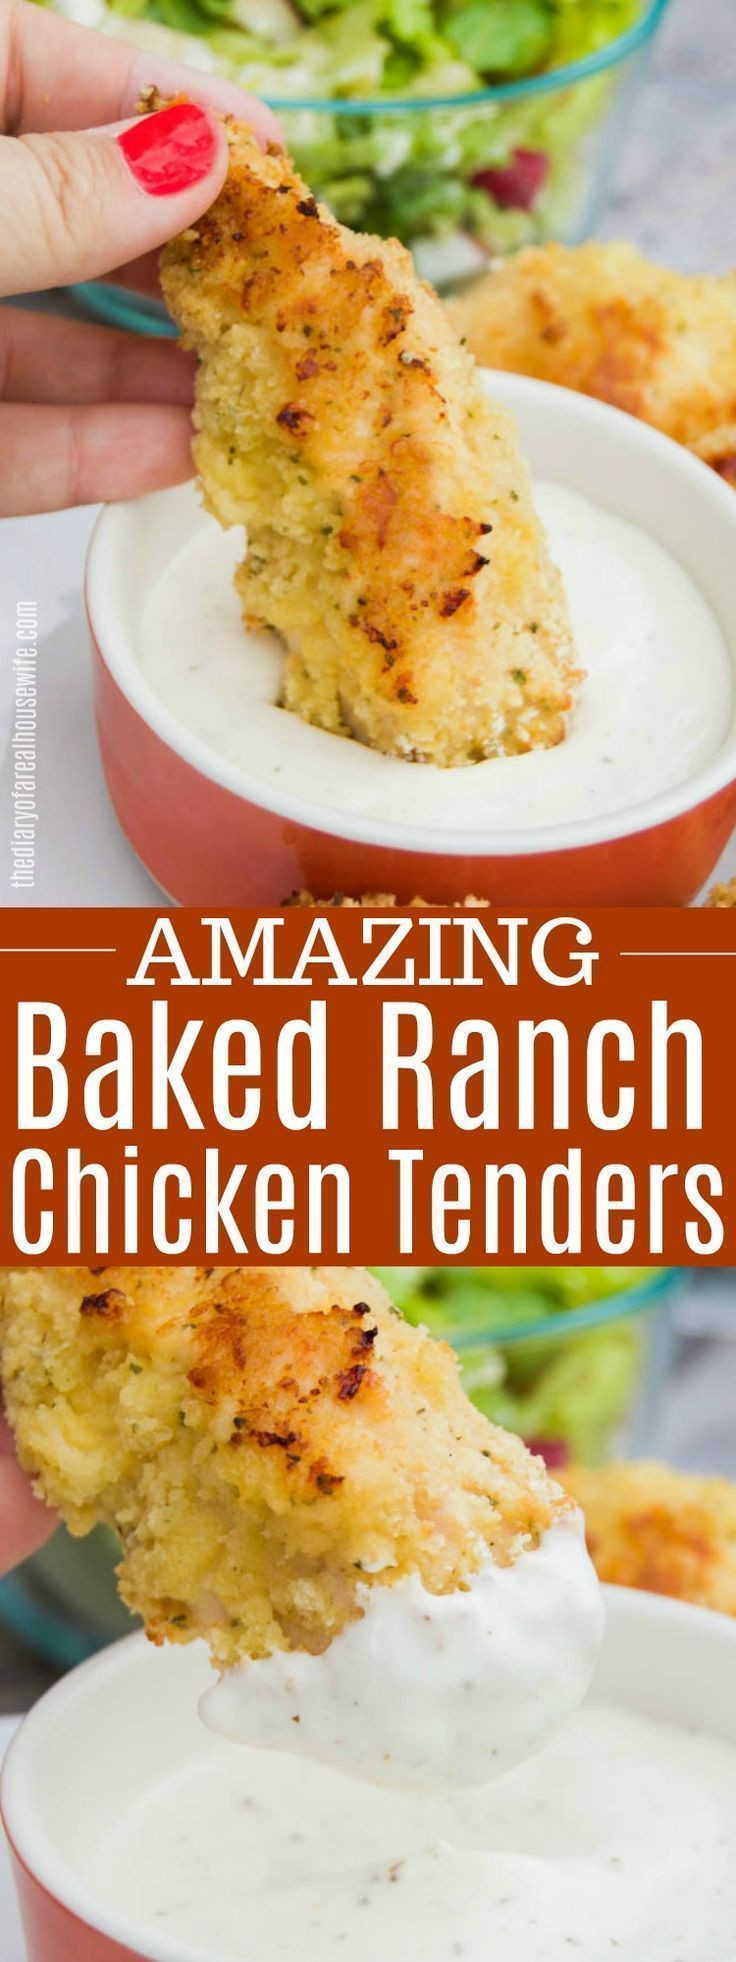 Chicken Tenders Recipes For Kids
 Baked Ranch Chicken Tenders Perfect kid friendly dinner